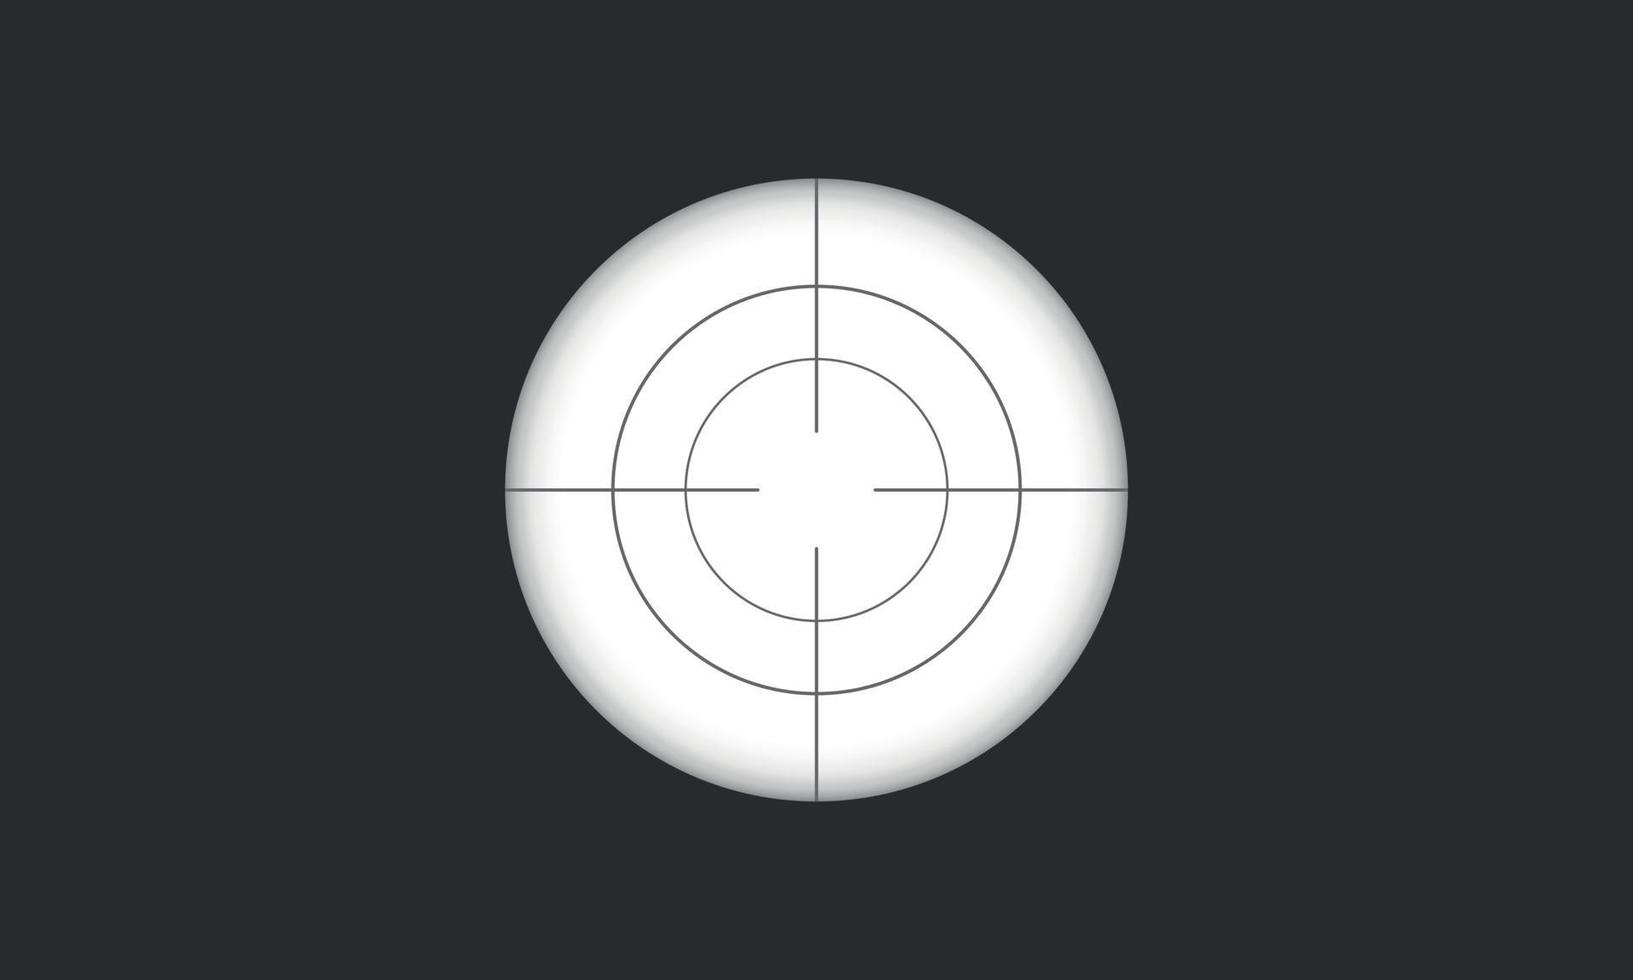 Sniper scope crosshairs view with measurement marks. Optical sight. Military shot, point sight, killer. Vector